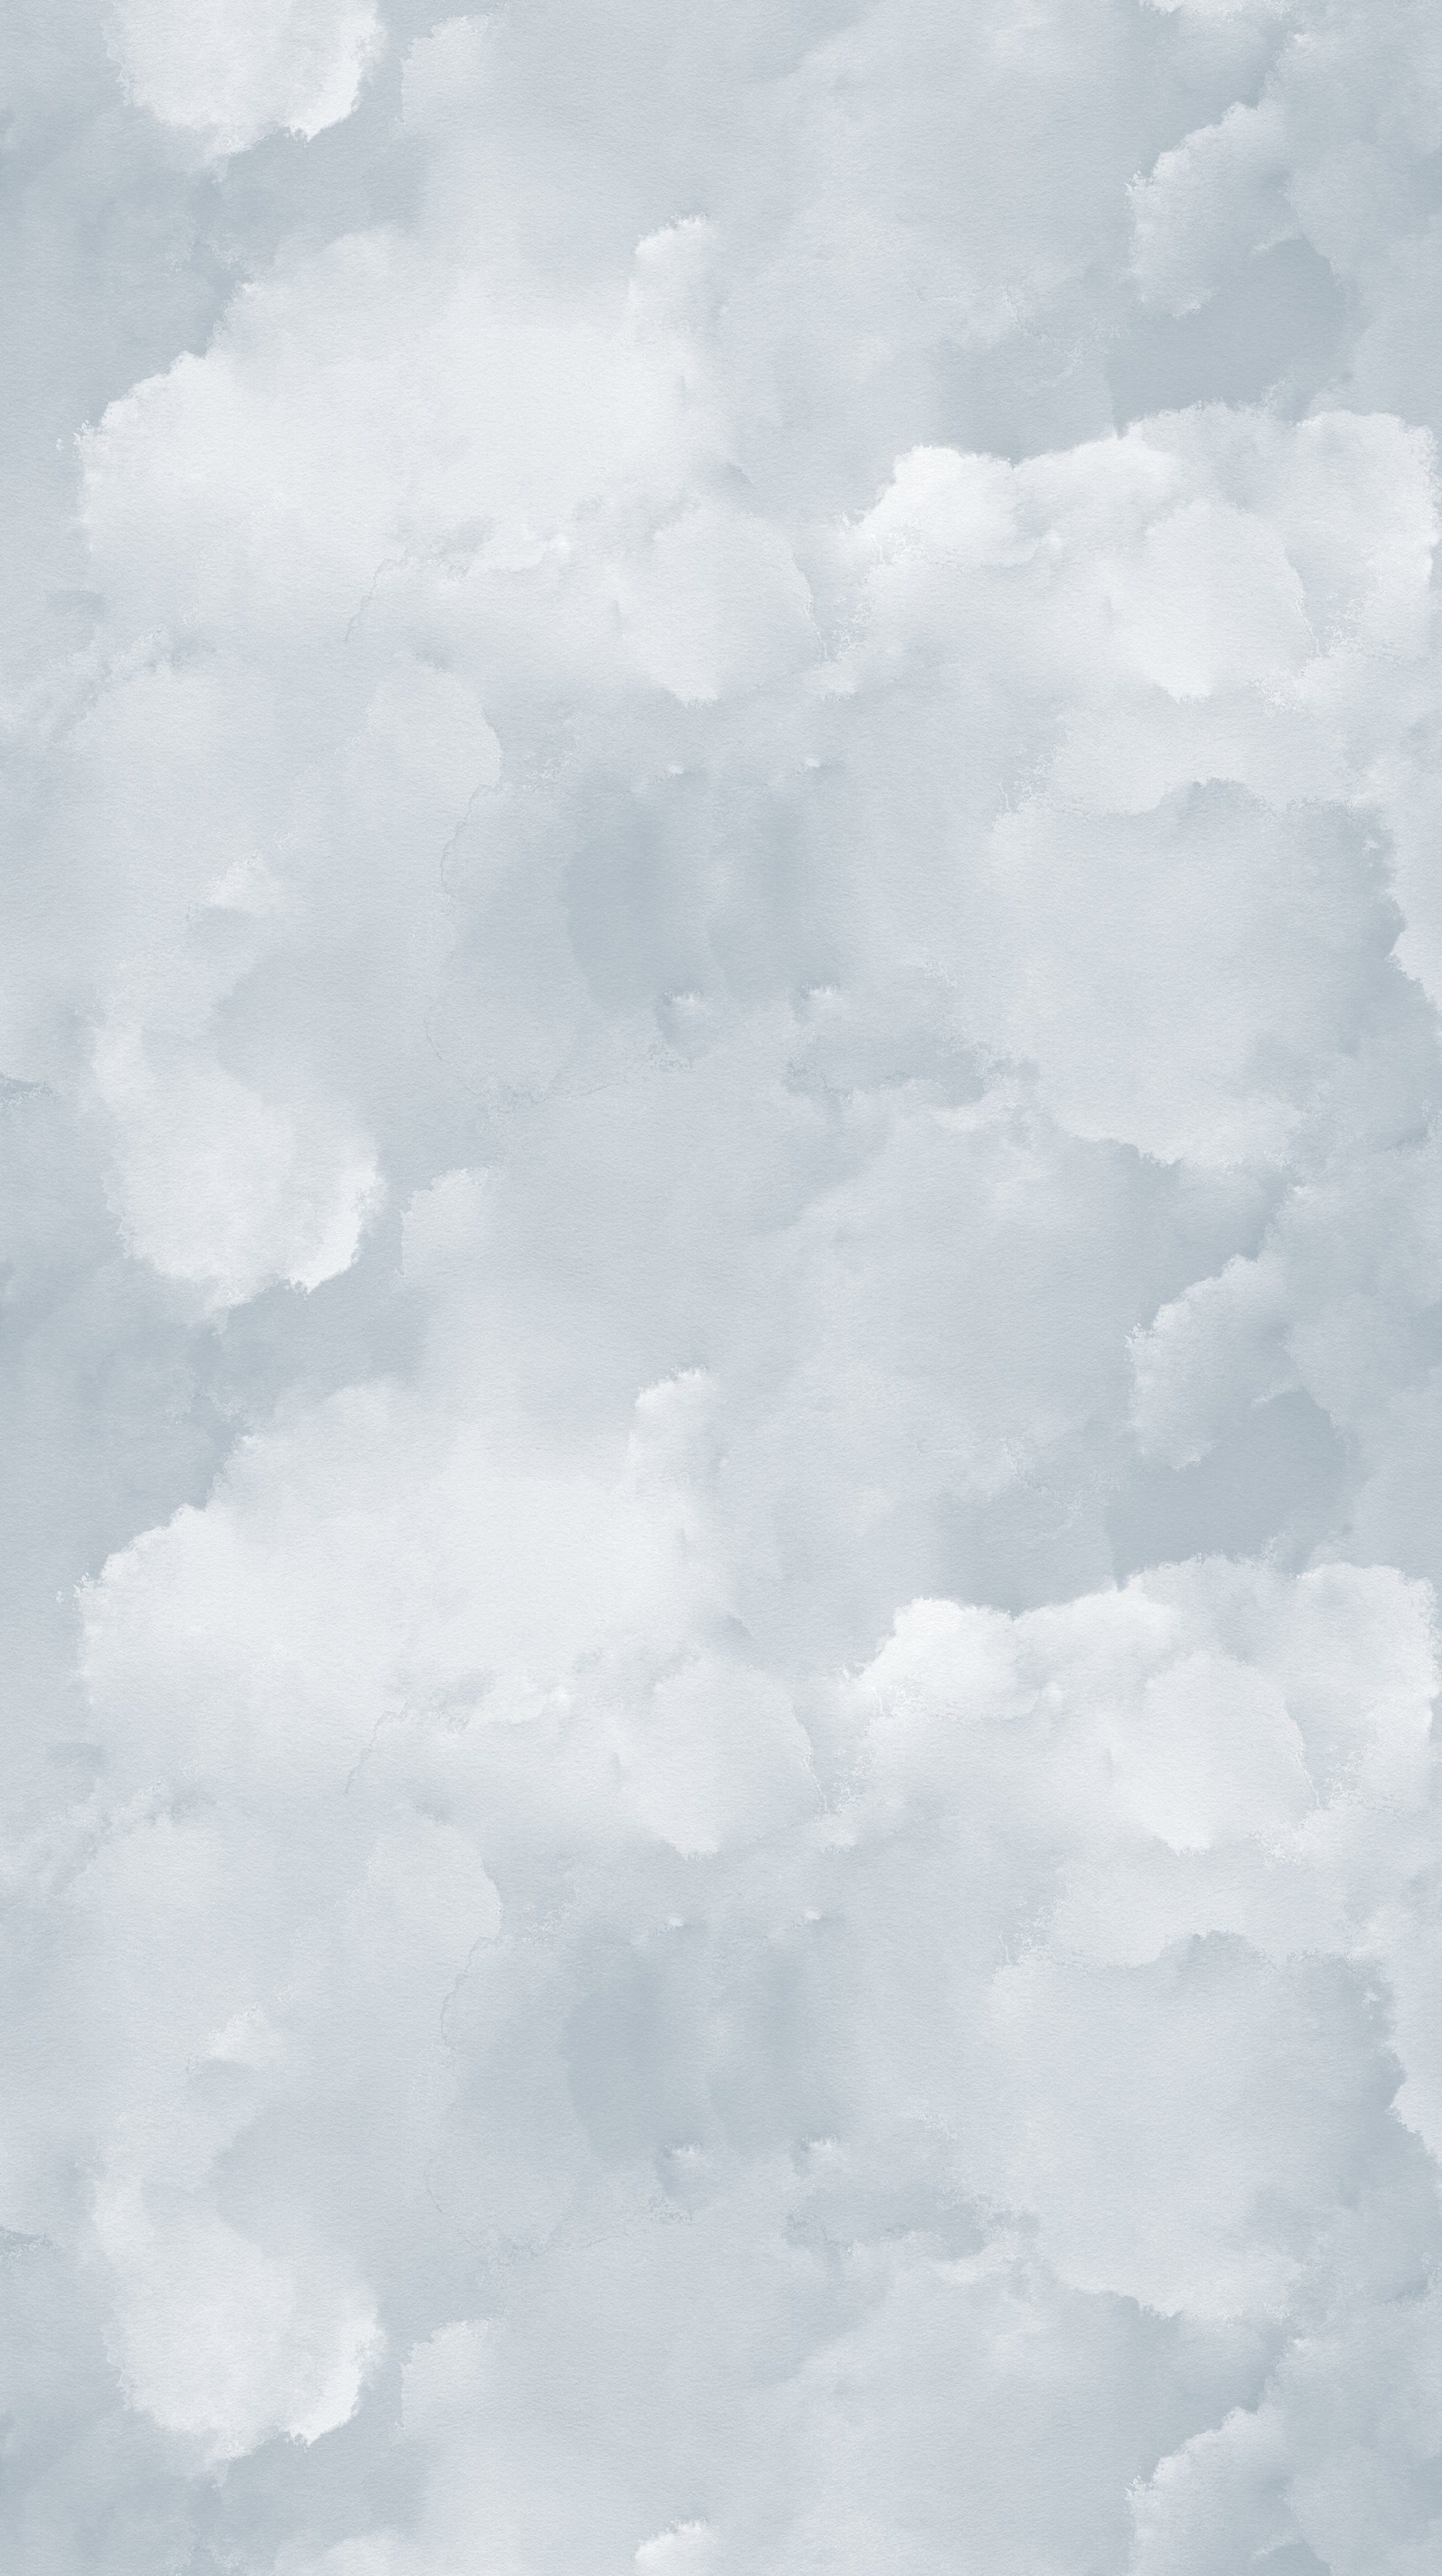 A close-up view of the Cloud Mural Wallpaper in Pale Blue, showcasing its tranquil and ethereal cloud design that resembles a calm, overcast sky. The subtle variations in blue create a dynamic yet peaceful visual texture.